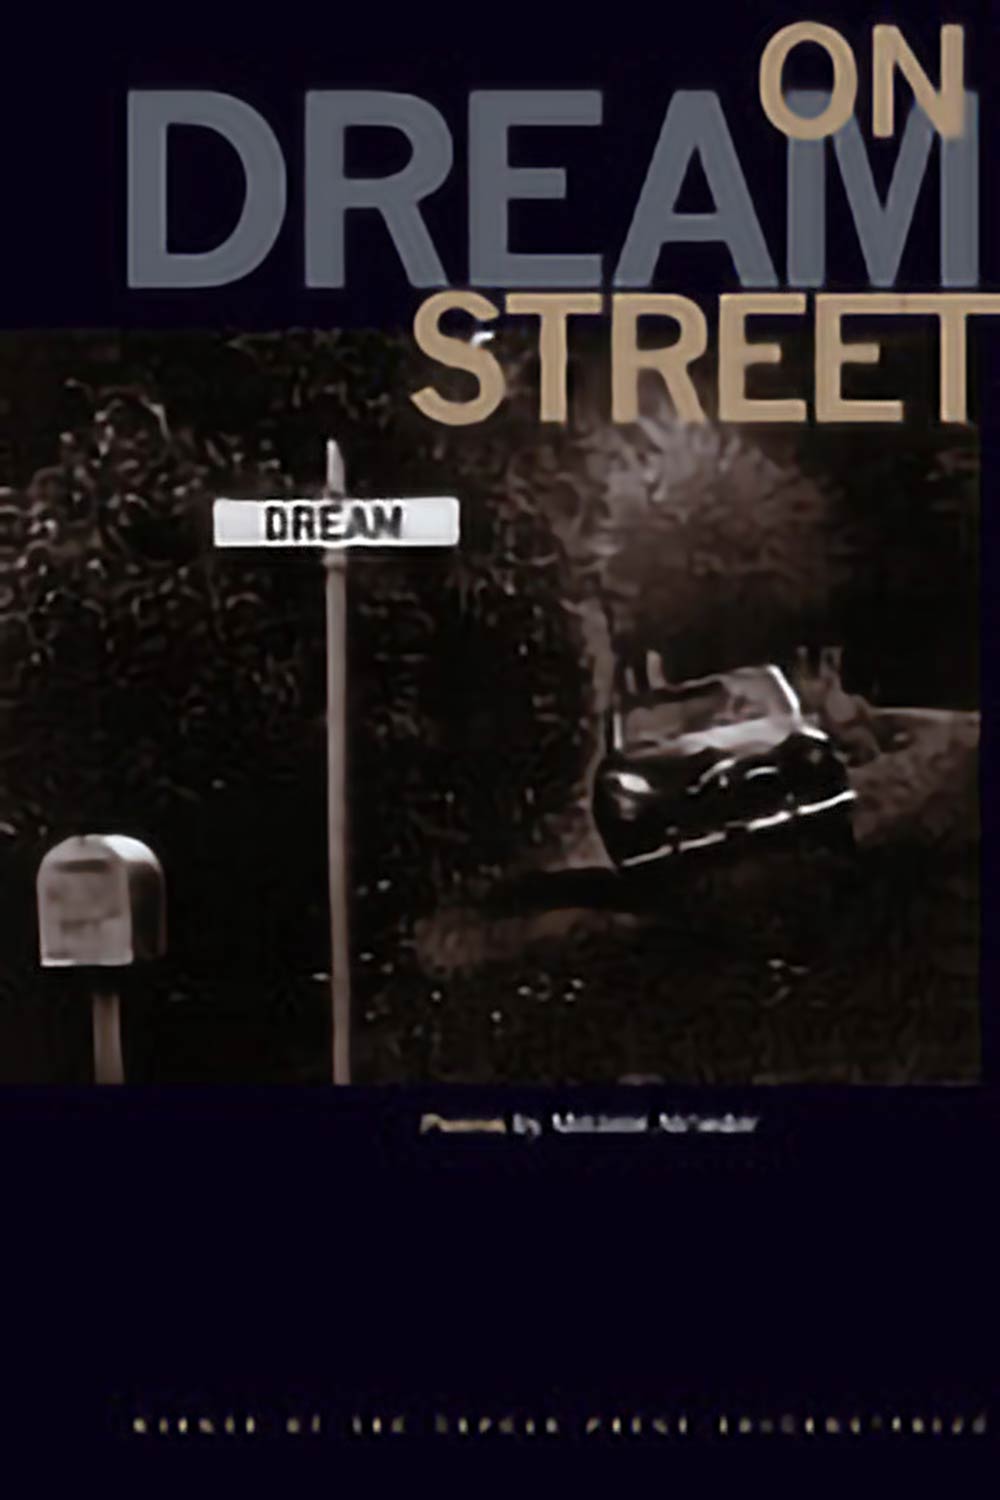 "On Dream Street" book cover